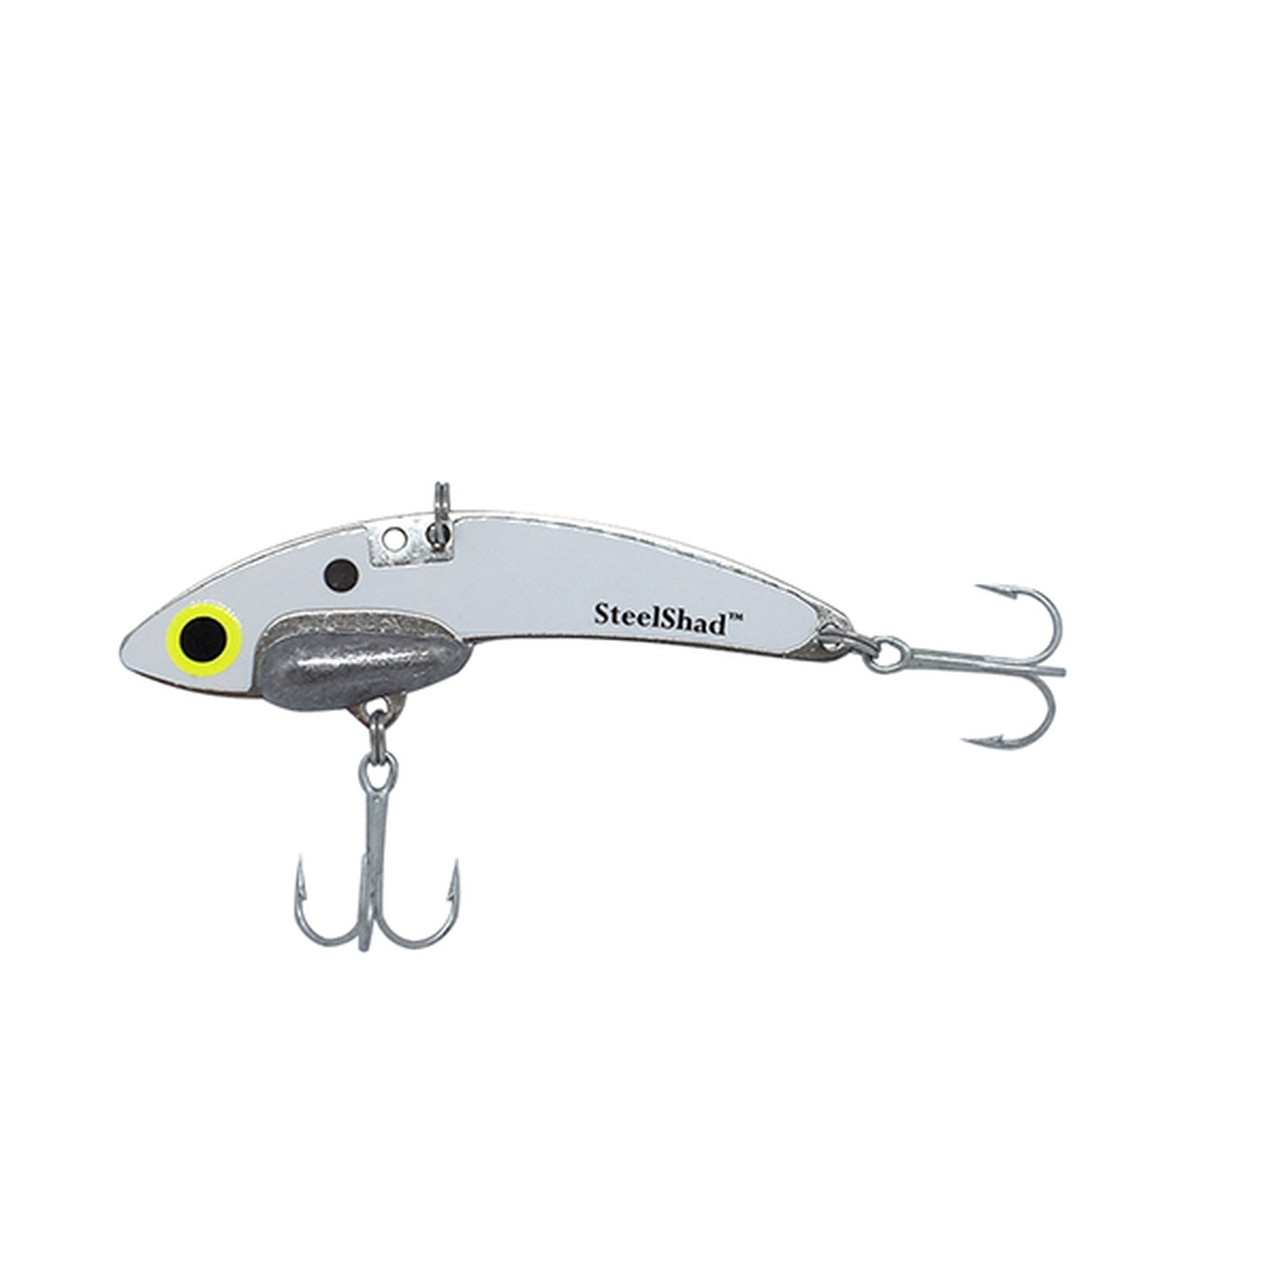 The Original SteelShad Fishing Lure SS 3/8 OZ 2-3/4 CHOOSE YOUR COLOR!